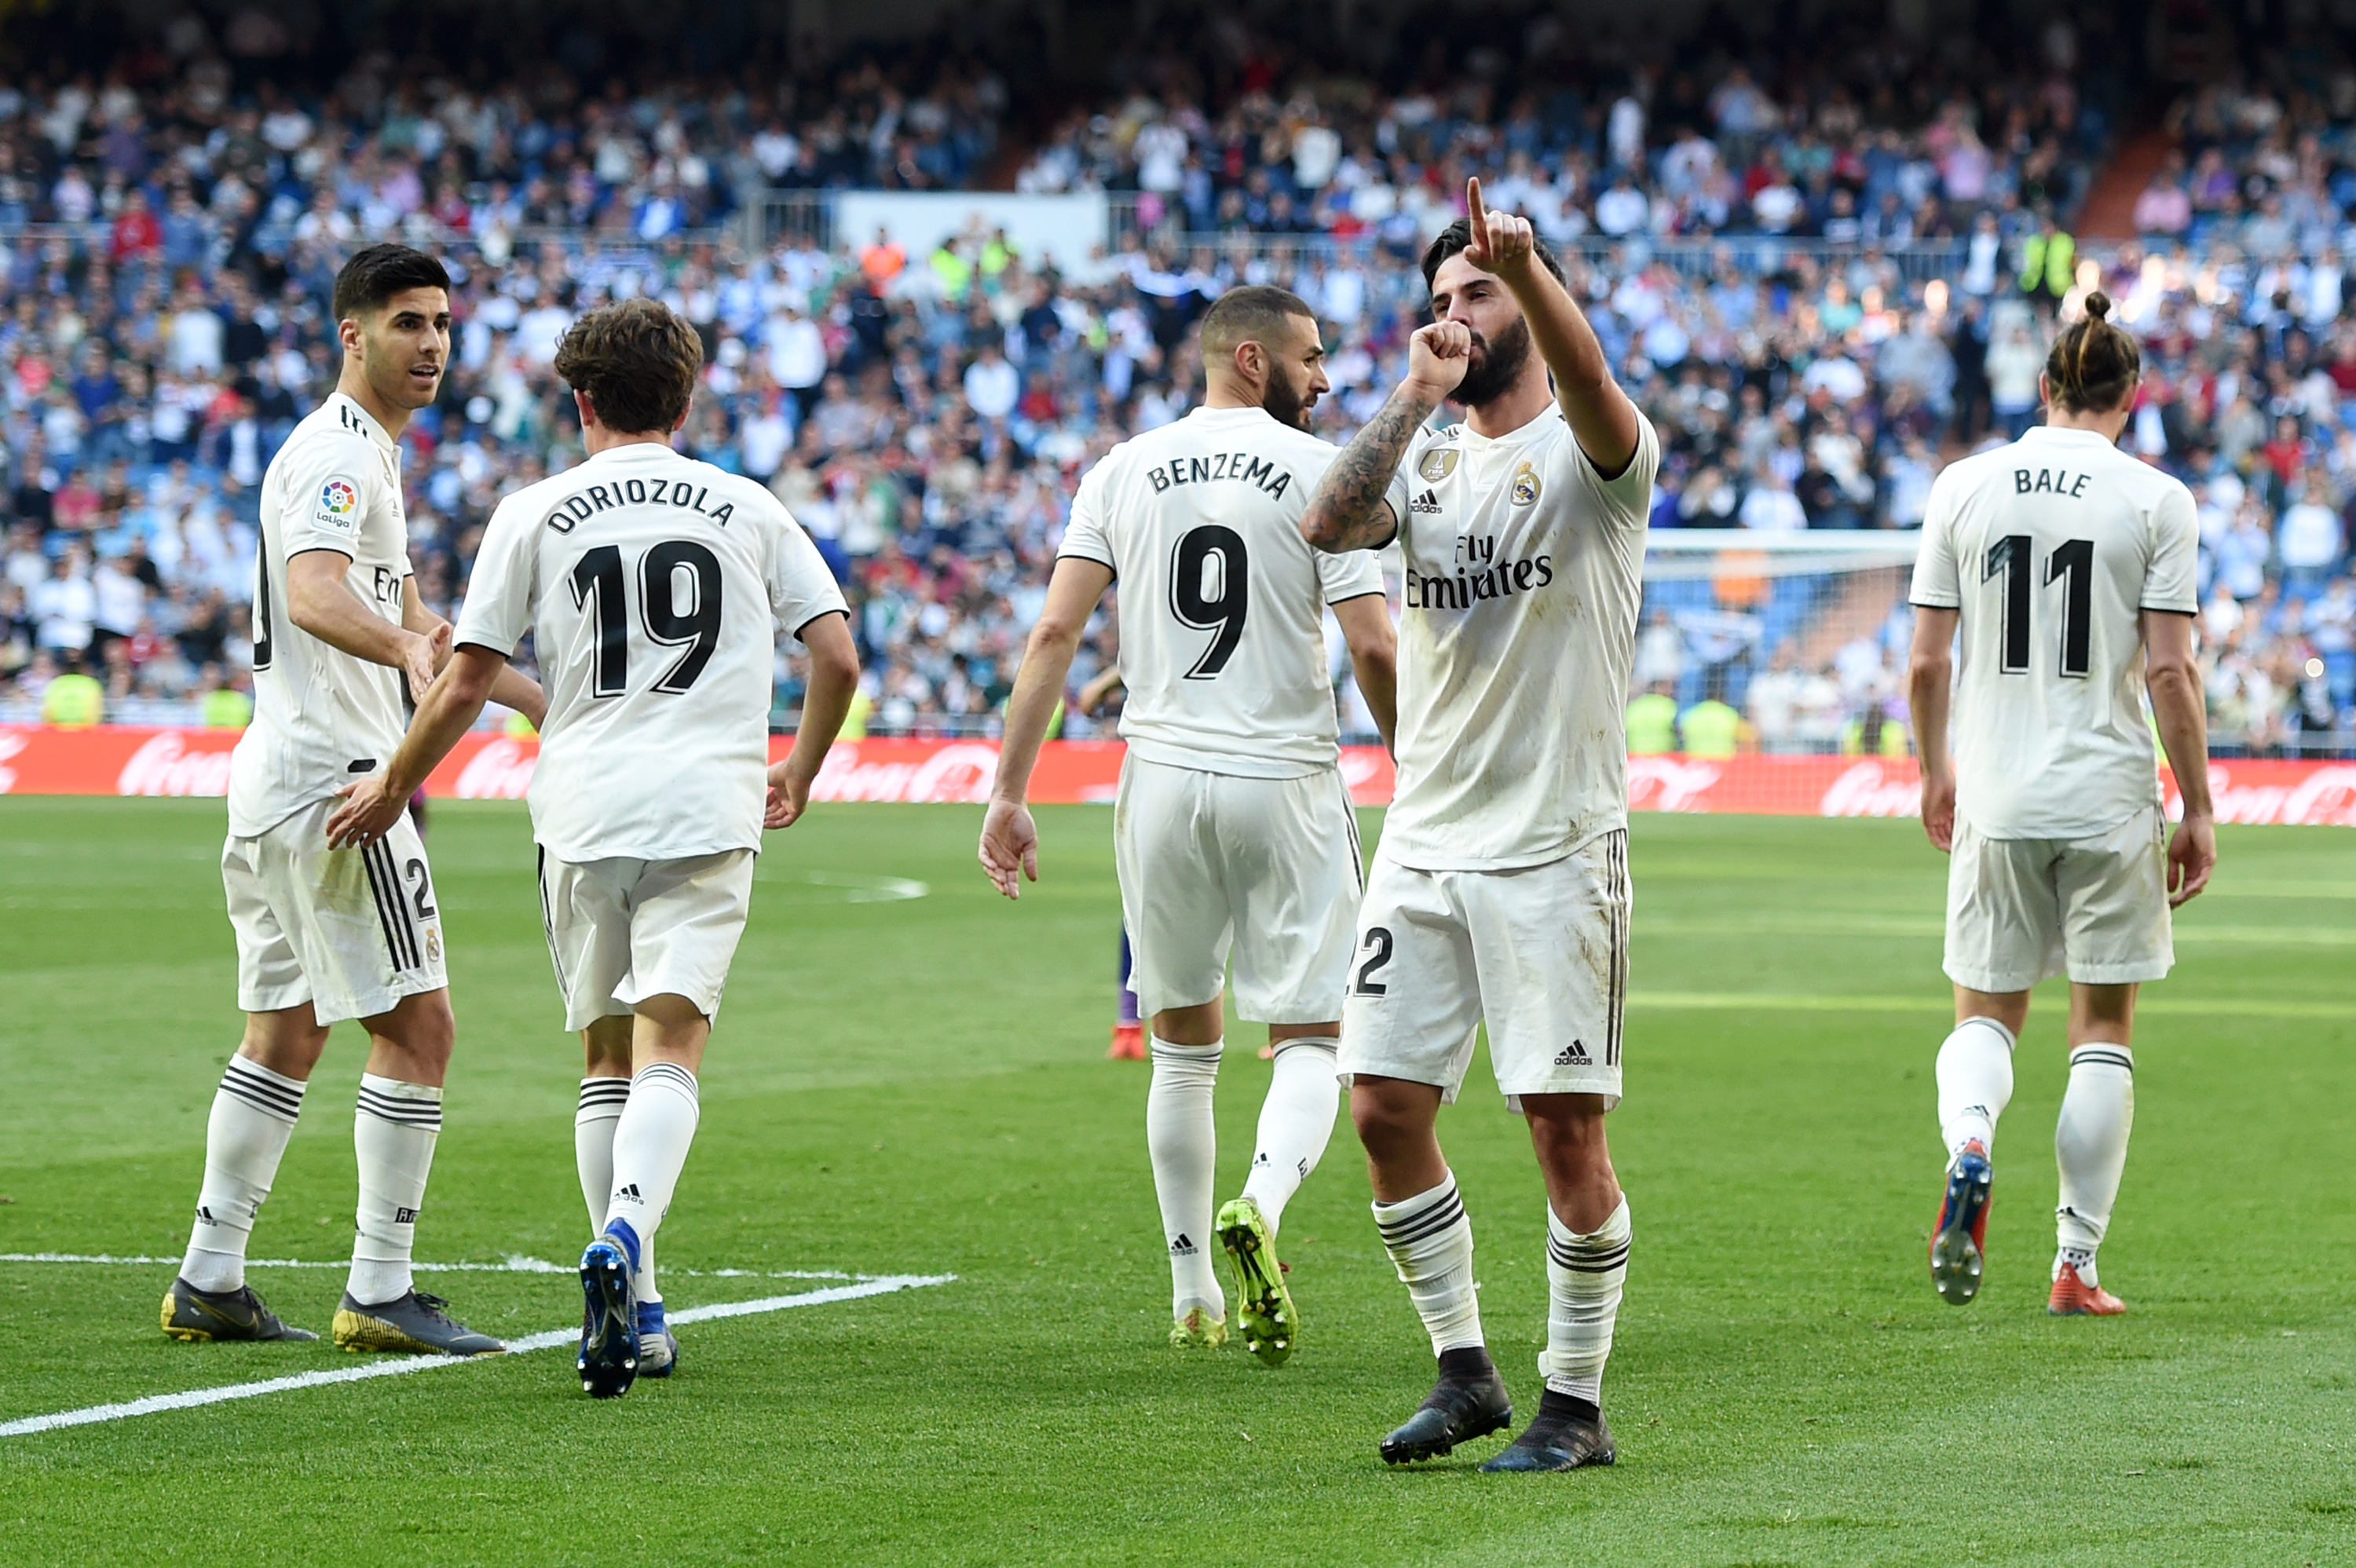 MADRID, SPAIN - MARCH 16: Isco of Real Madrid celebrates with teammates after scoring his team's first goal during the La Liga match between Real Madrid CF and RC Celta de Vigo at Estadio Santiago Bernabeu on March 16, 2019 in Madrid, Spain. (Photo by Denis Doyle/Getty Images)